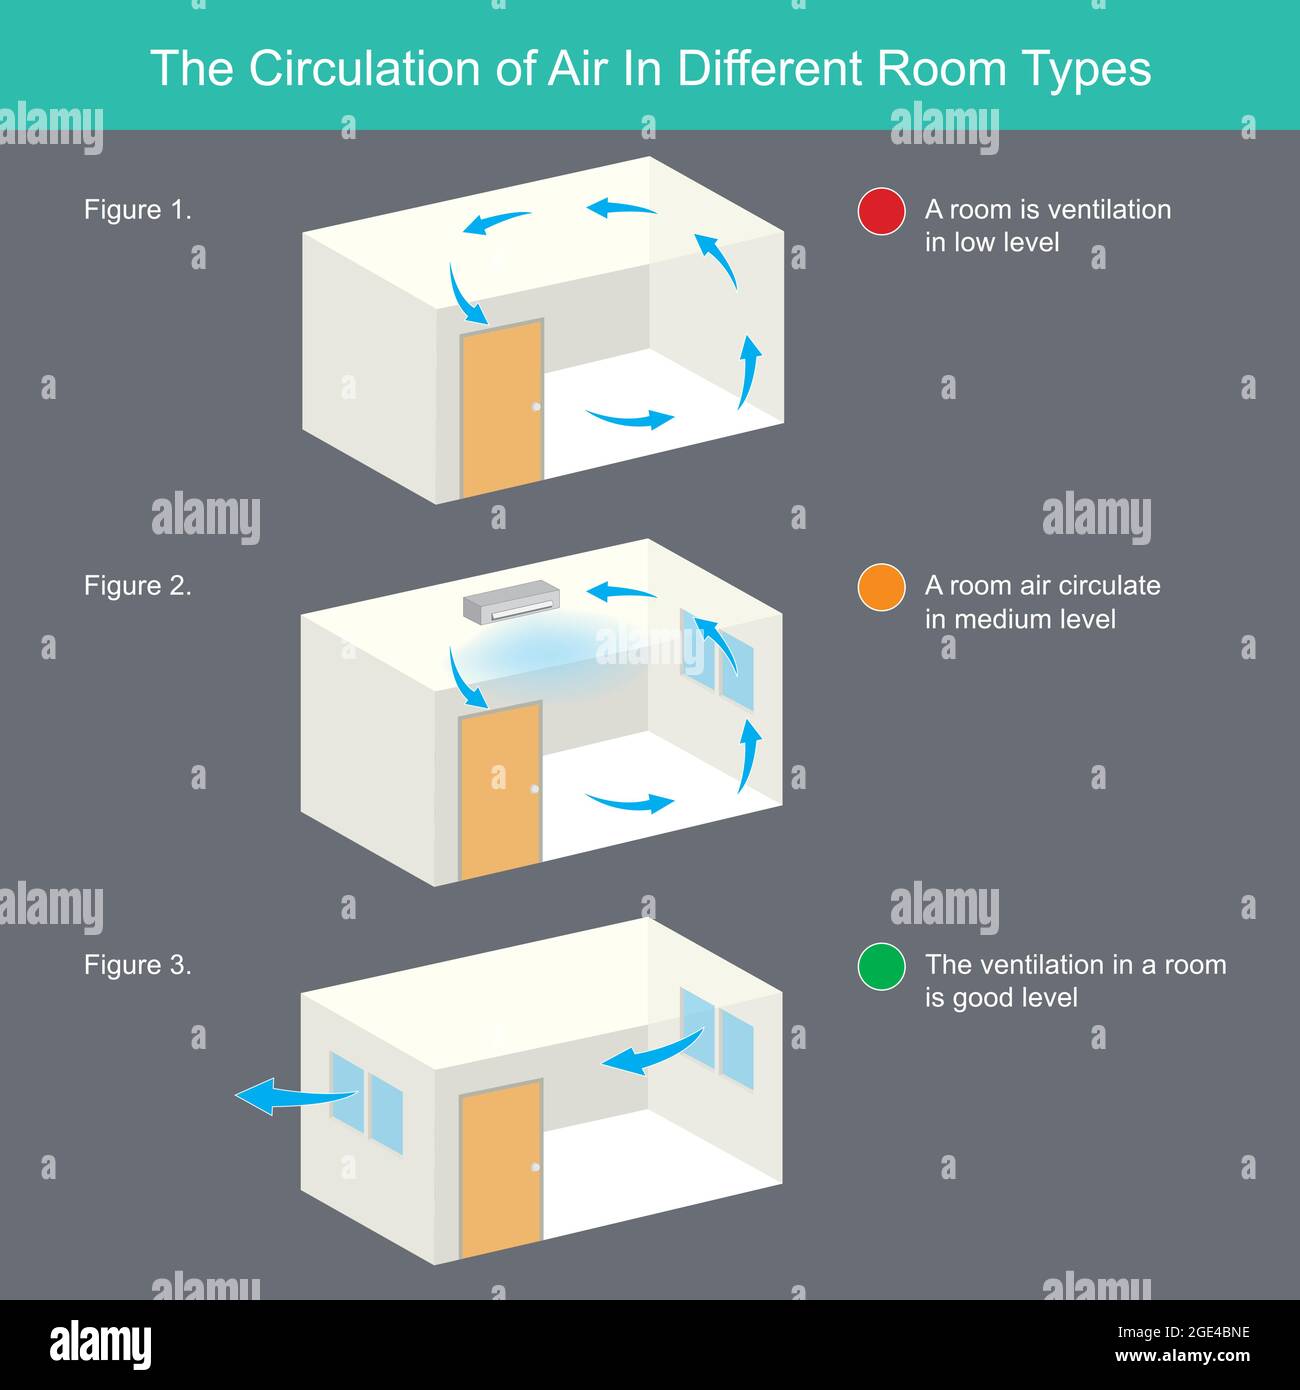 The circulation of air in different room types. Illustration explain the circulate of air in different room types Stock Vector